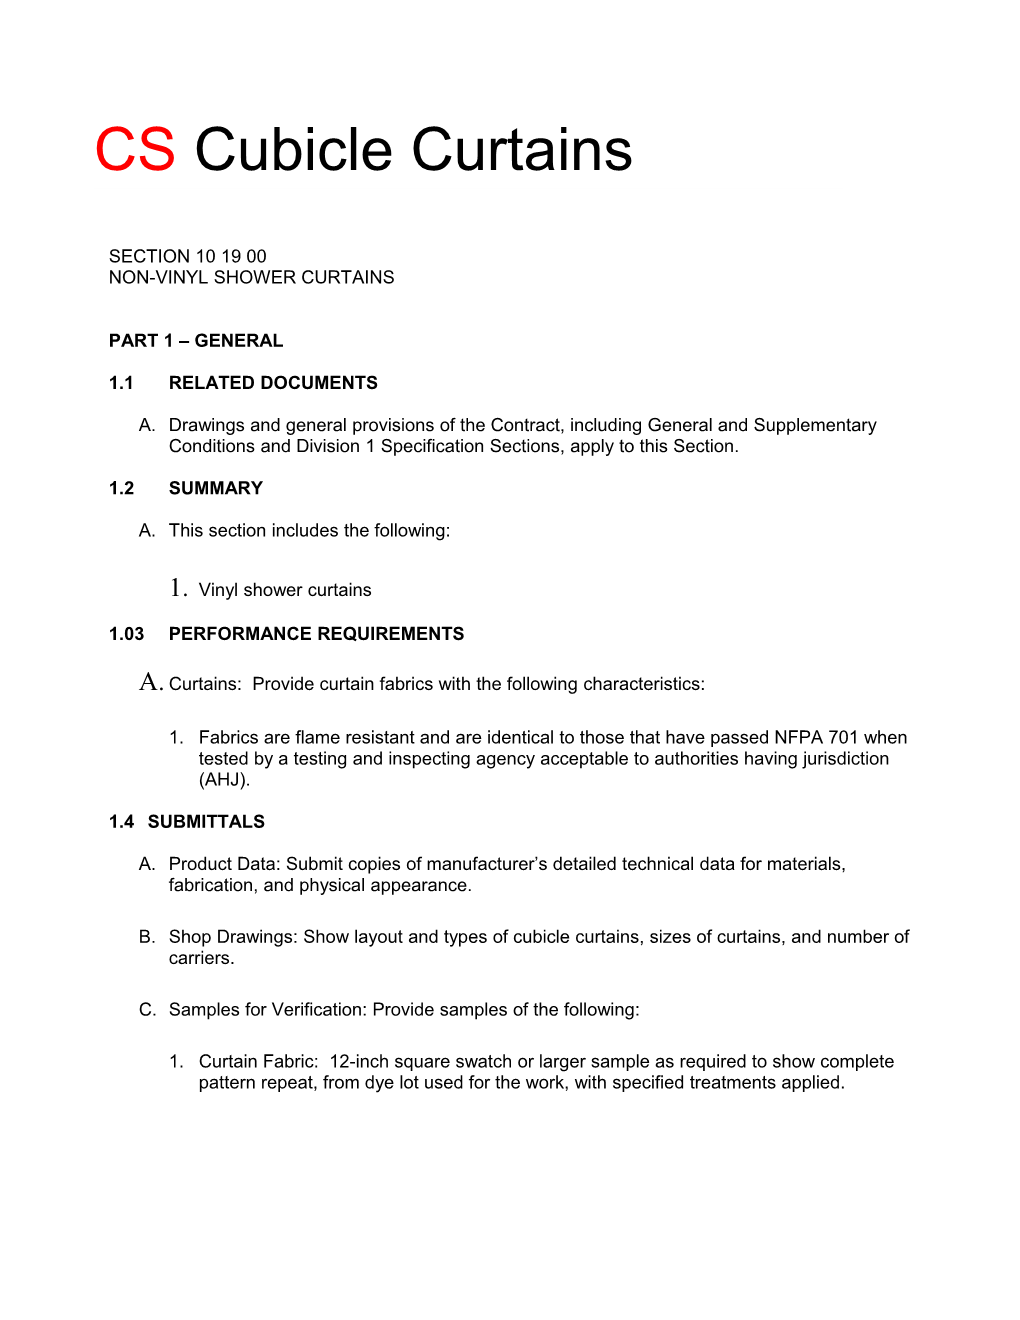 Cubicle Curtain Specification